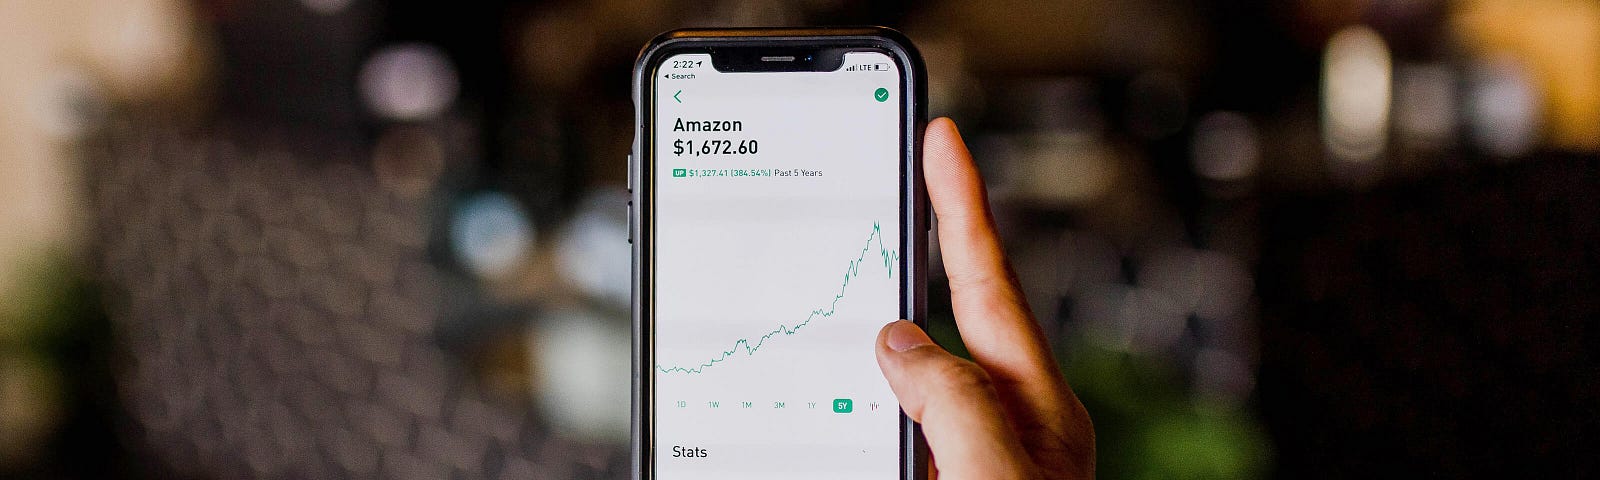 person holding smartphone with Amazon stock graph